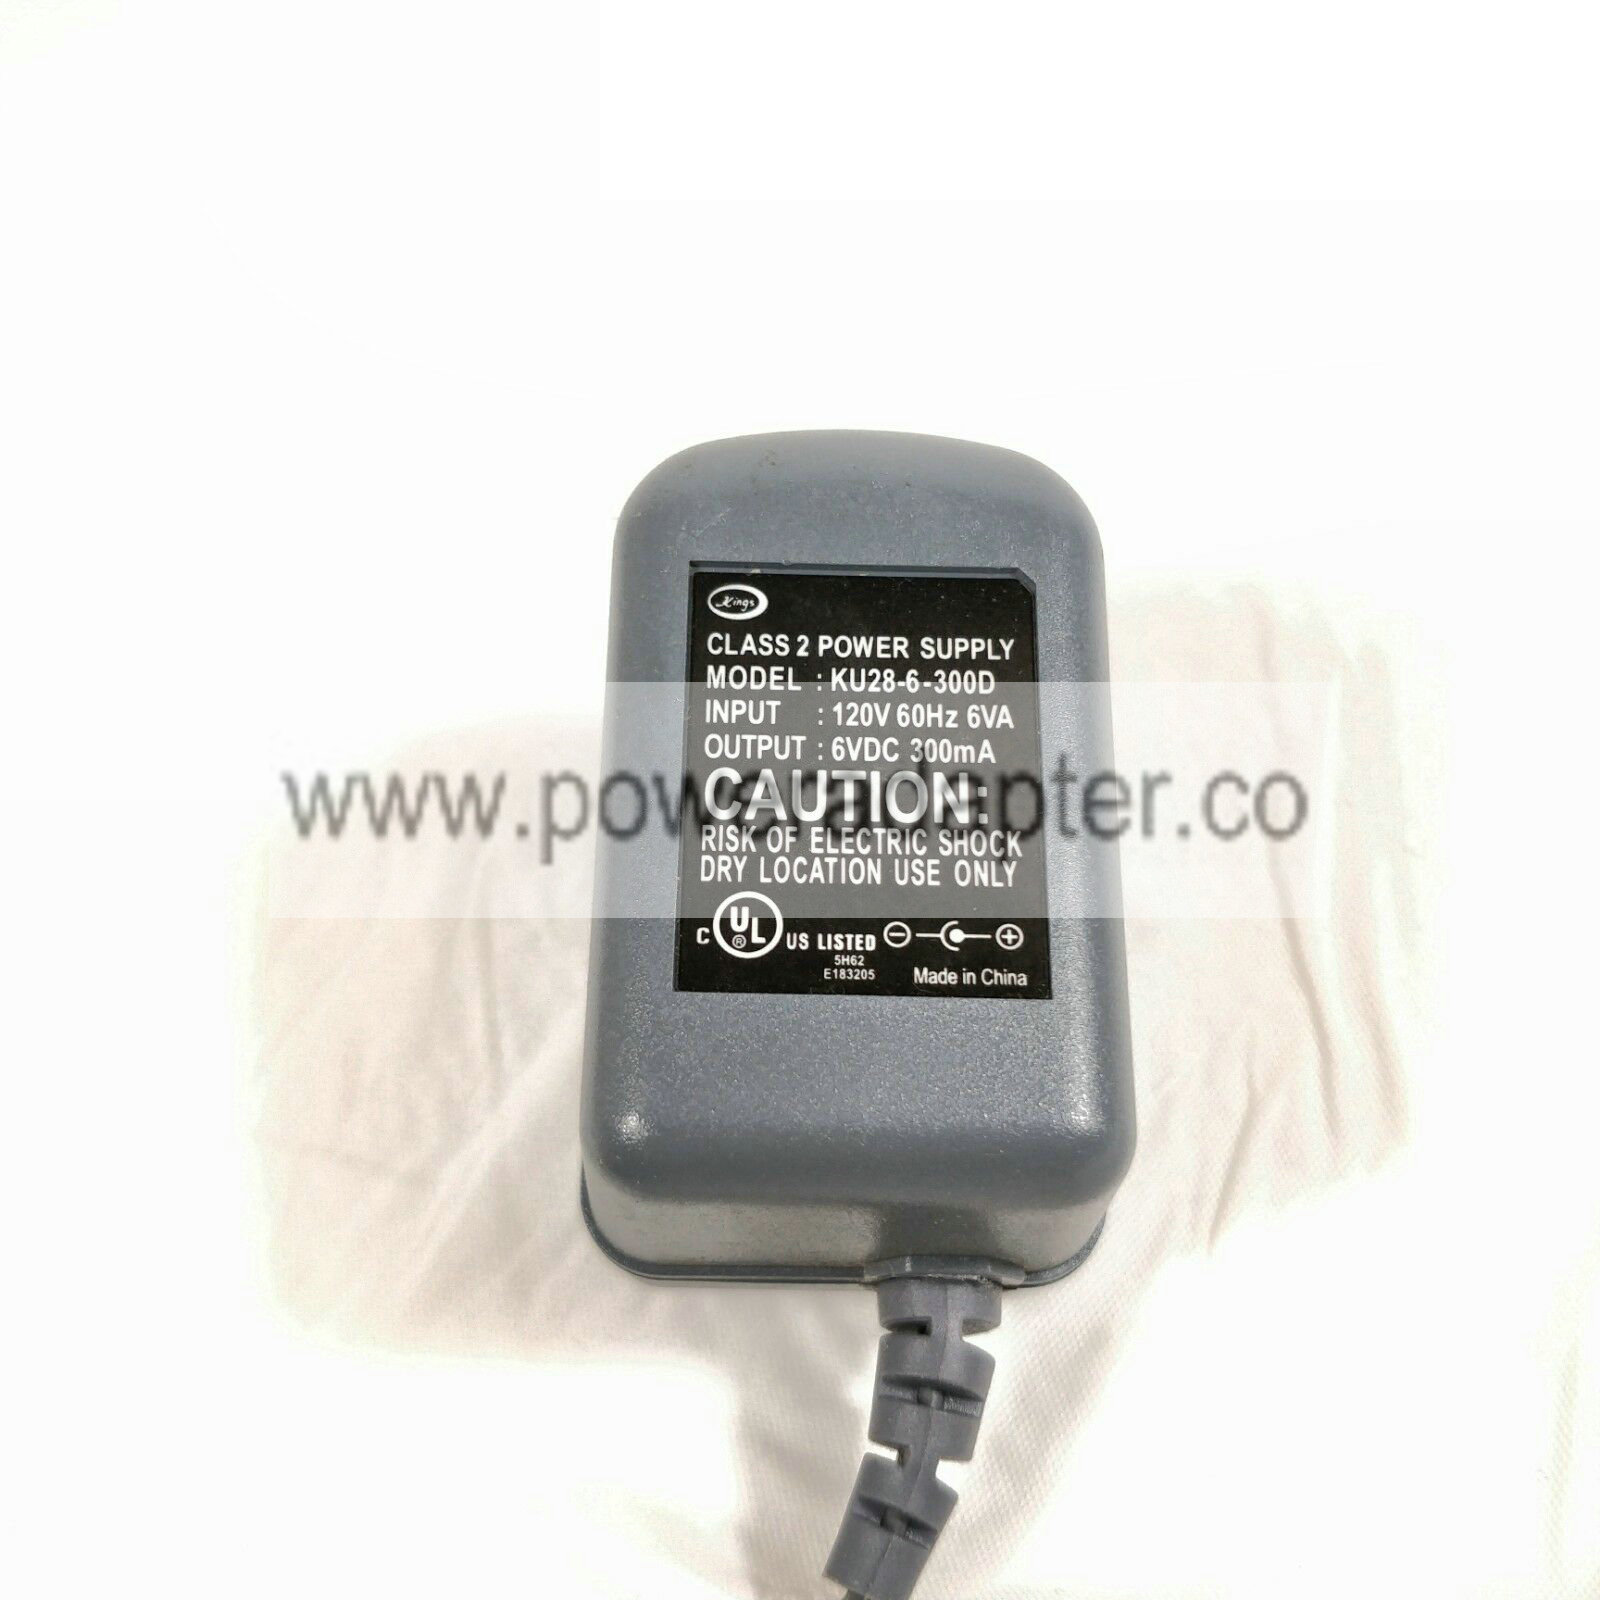 Kings/Hello Kitty KU28-6-300D Baby Monitor AC Adapter 6V DC 300mA Power Supply Quick Info:Great OEM charger for your